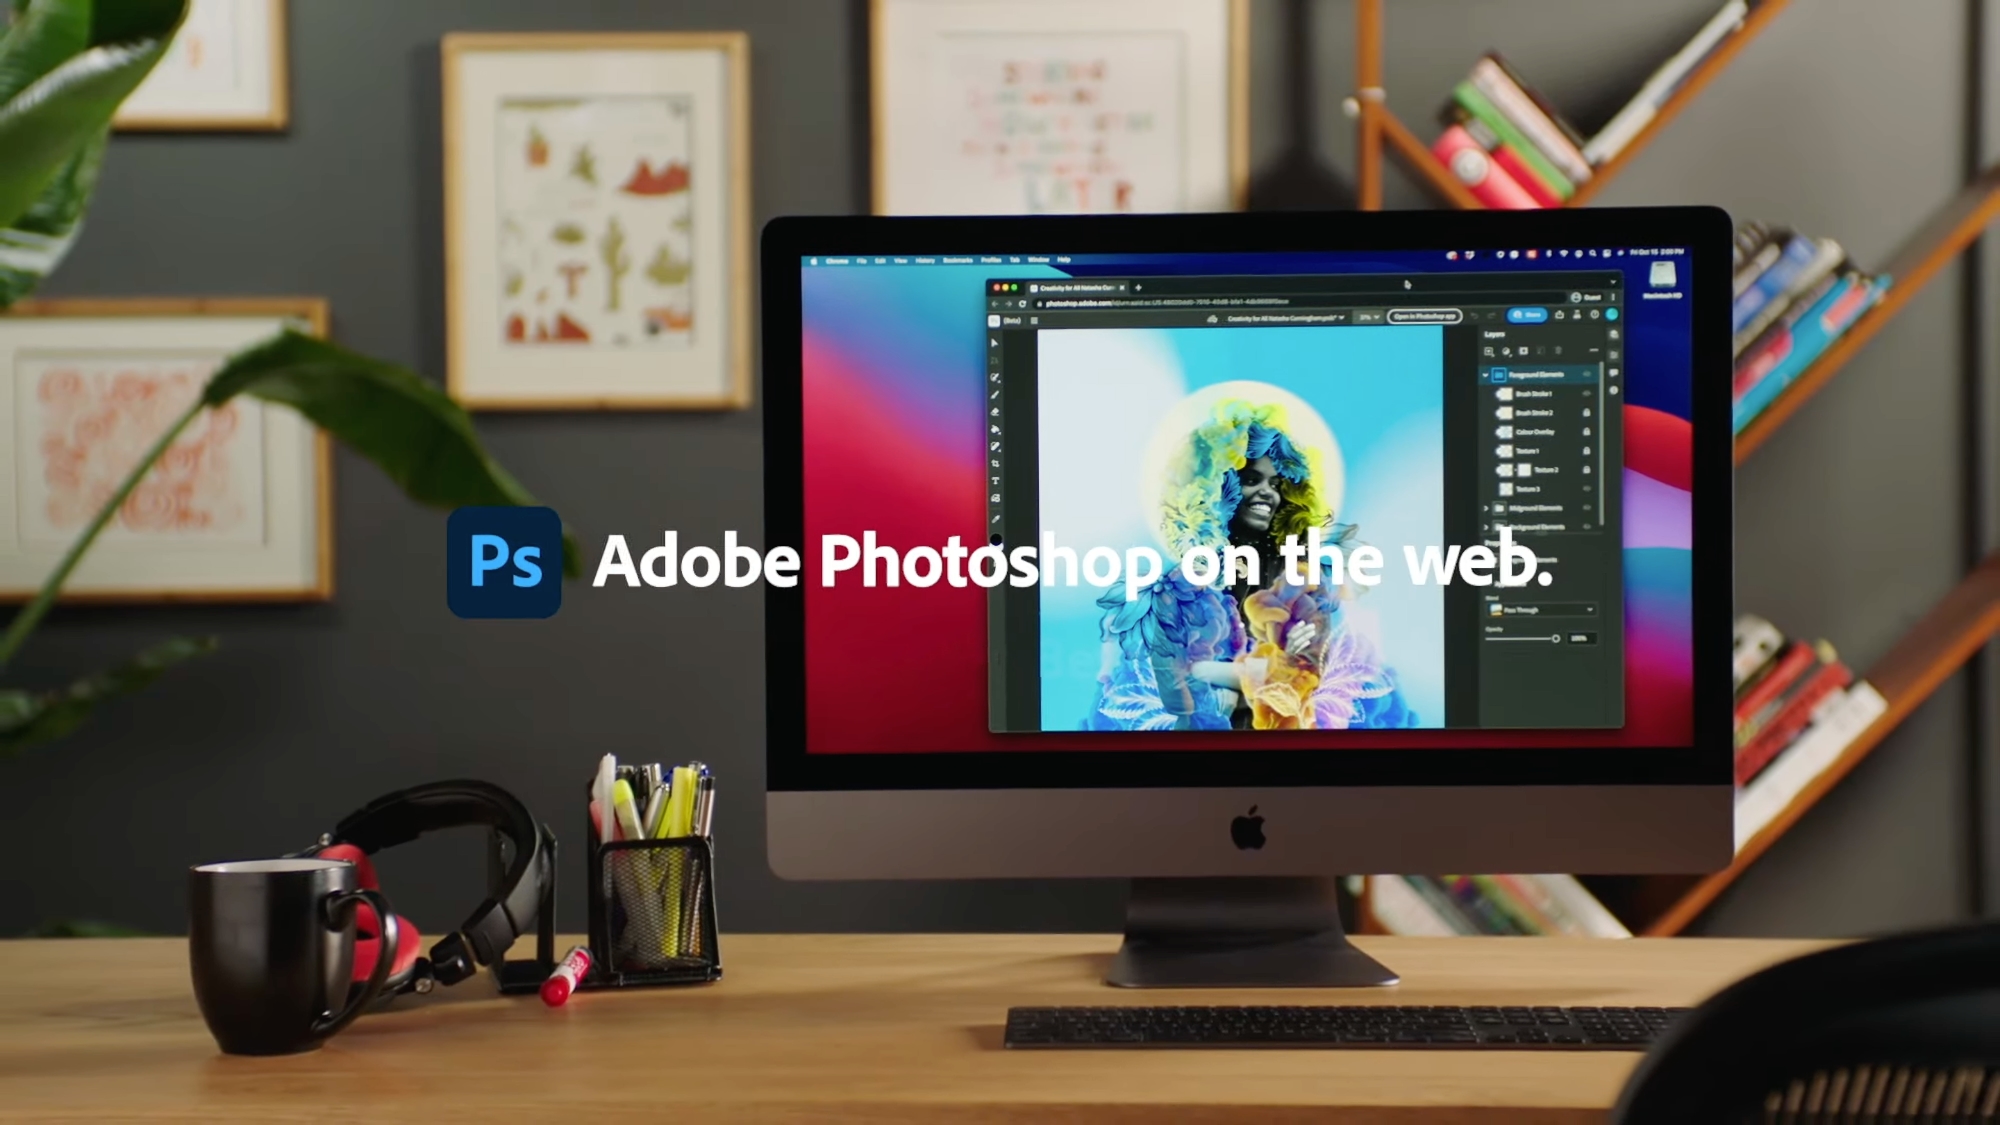 Adobe announced Photoshop web version and app major update for iPad